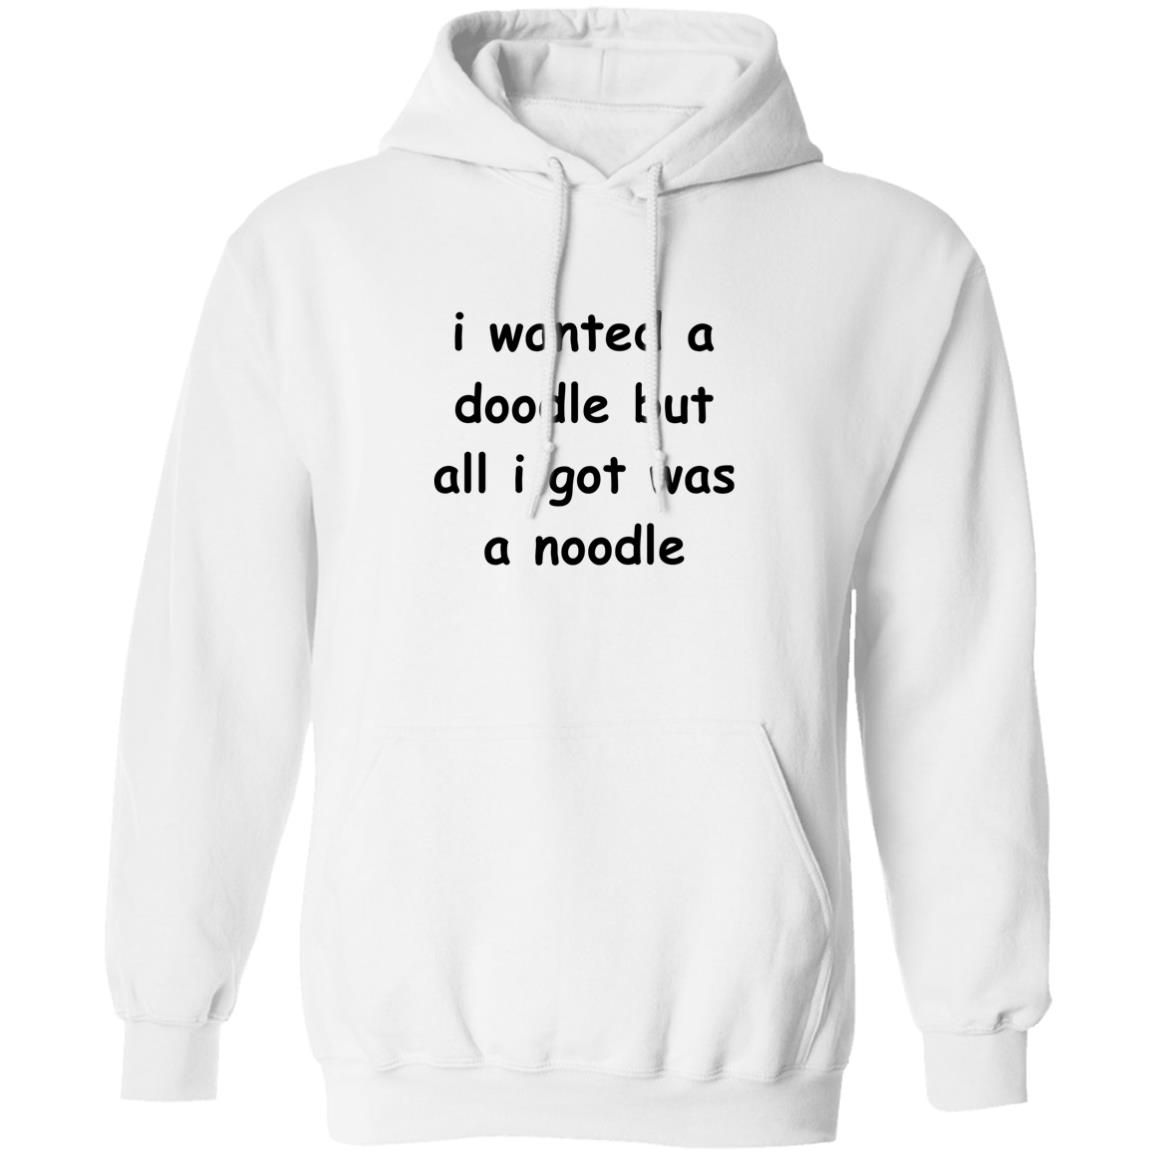 I Wanted A Doodle But All I Got Was A Noodle Shirt 2